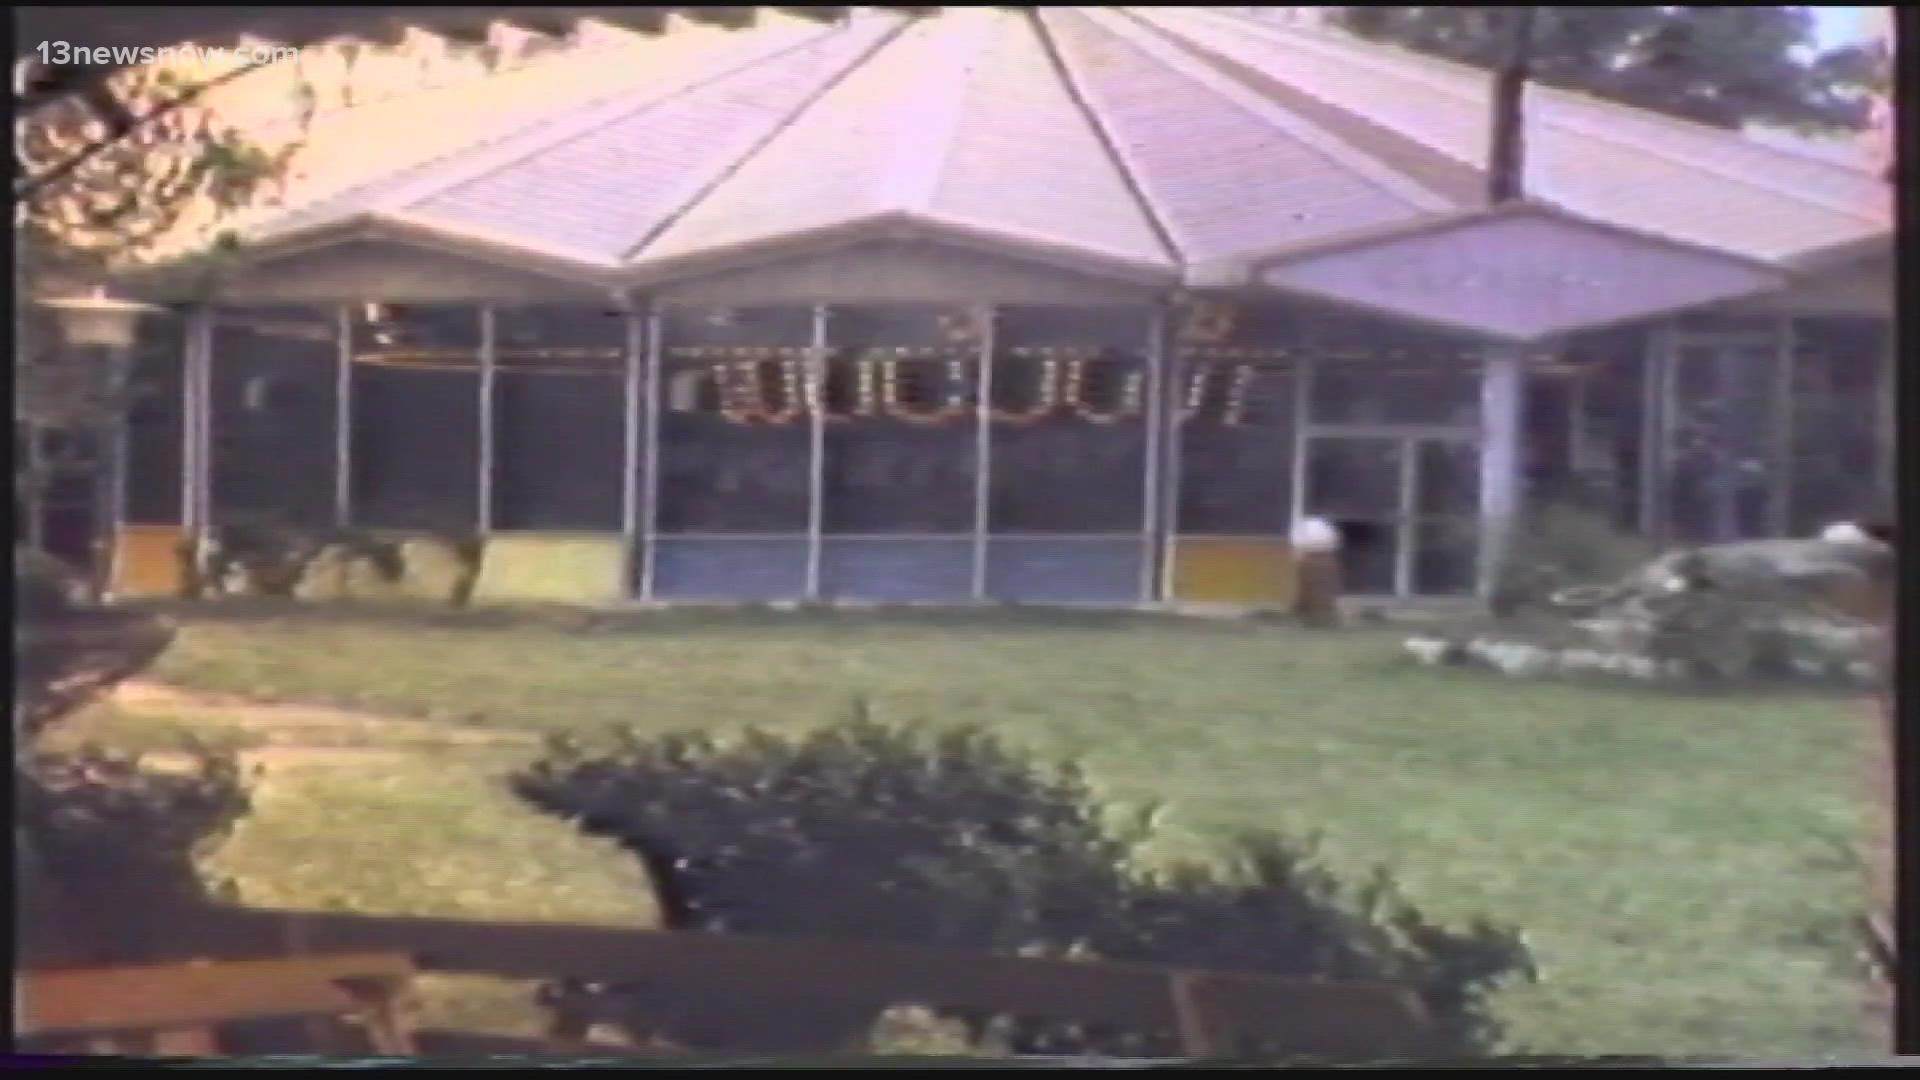 City Council will seek public input on what do with Hampton's historic carousel, which is in disrepair and at risk of flooding in it's current location downtown.